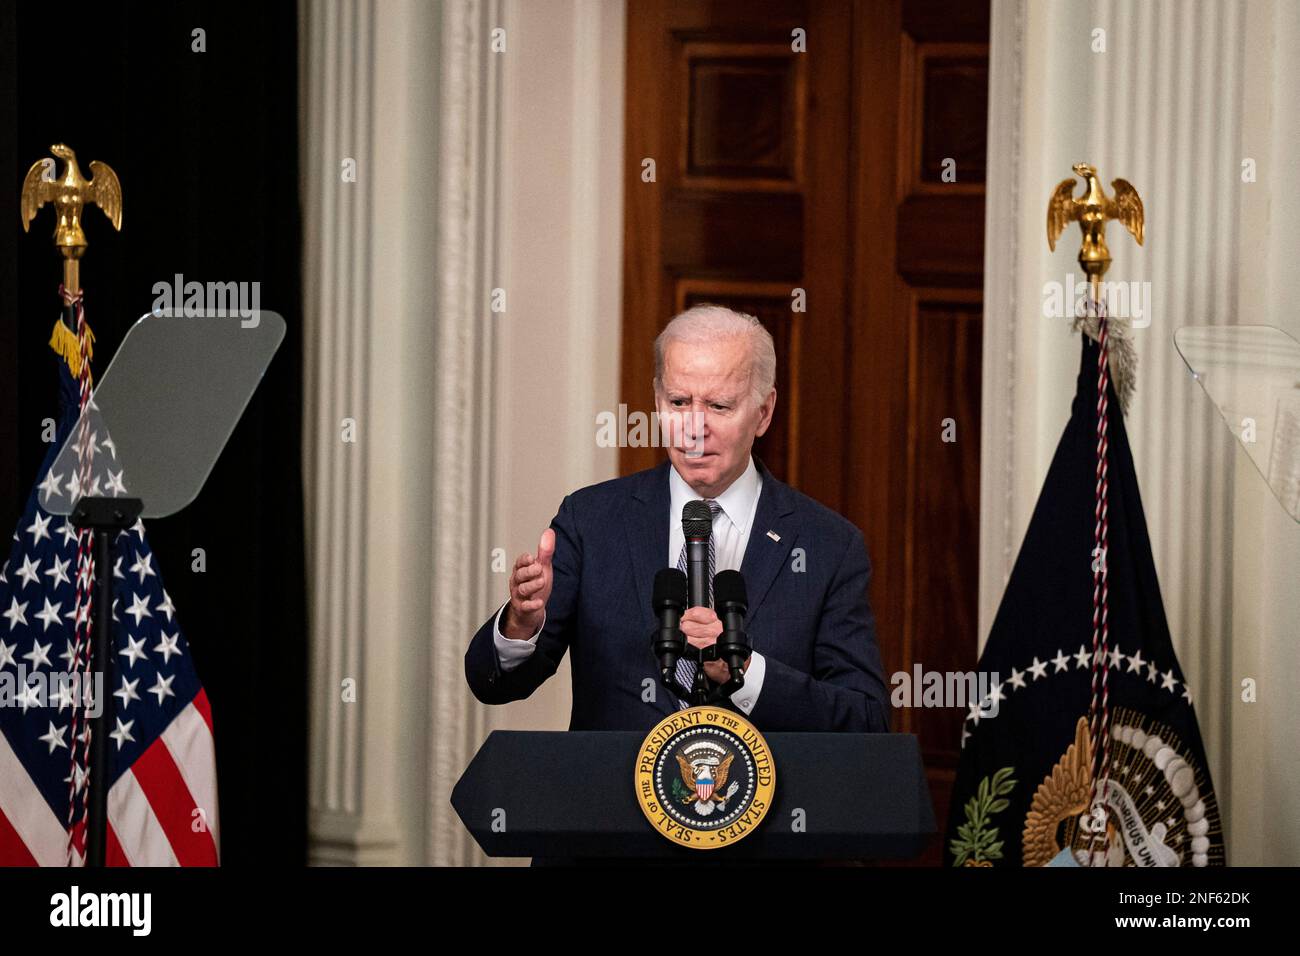 https://c8.alamy.com/comp/2NF62DK/us-president-joe-biden-speaks-while-hosting-a-screening-of-the-movie-till-in-the-east-room-of-the-white-house-in-washington-dc-usa-on-thursday-february-16-2023-biden-welcomed-civil-rights-leaders-and-victims-of-hate-fueled-violence-for-the-till-screening-a-movie-depicting-the-life-of-mamie-till-mobley-whose-son-emmett-till-a-black-teenager-was-brutally-lynched-in-mississippi-in-1955-photo-by-al-dragopoolabacapresscom-2NF62DK.jpg